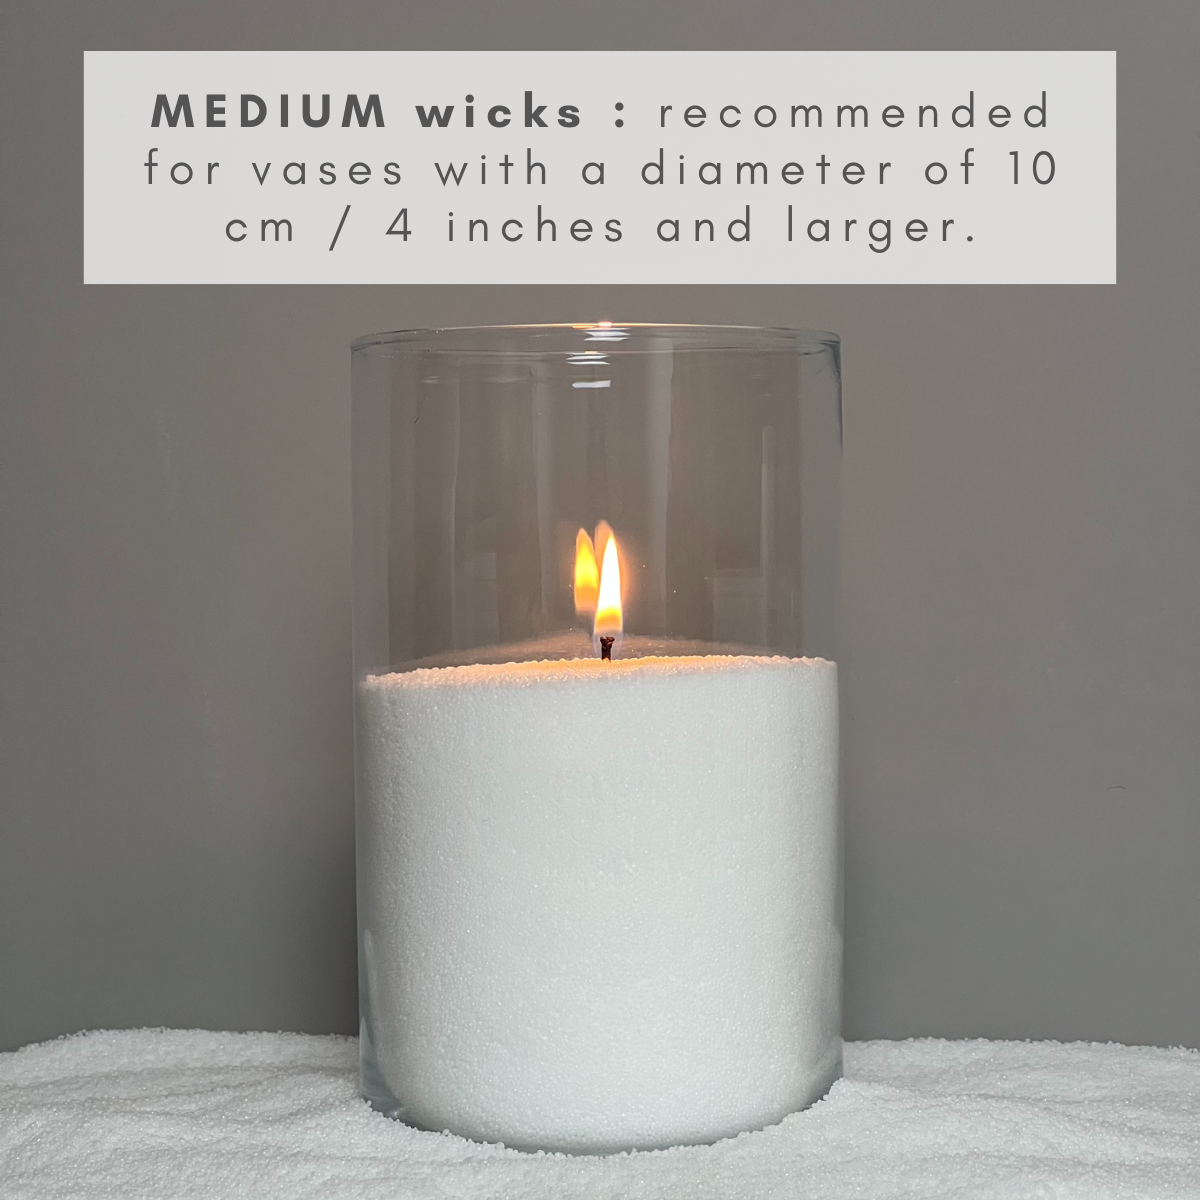 Mediums wicks for Candle Sand Recommended for vases with a diameter of 10 cm / 4 inches and larger